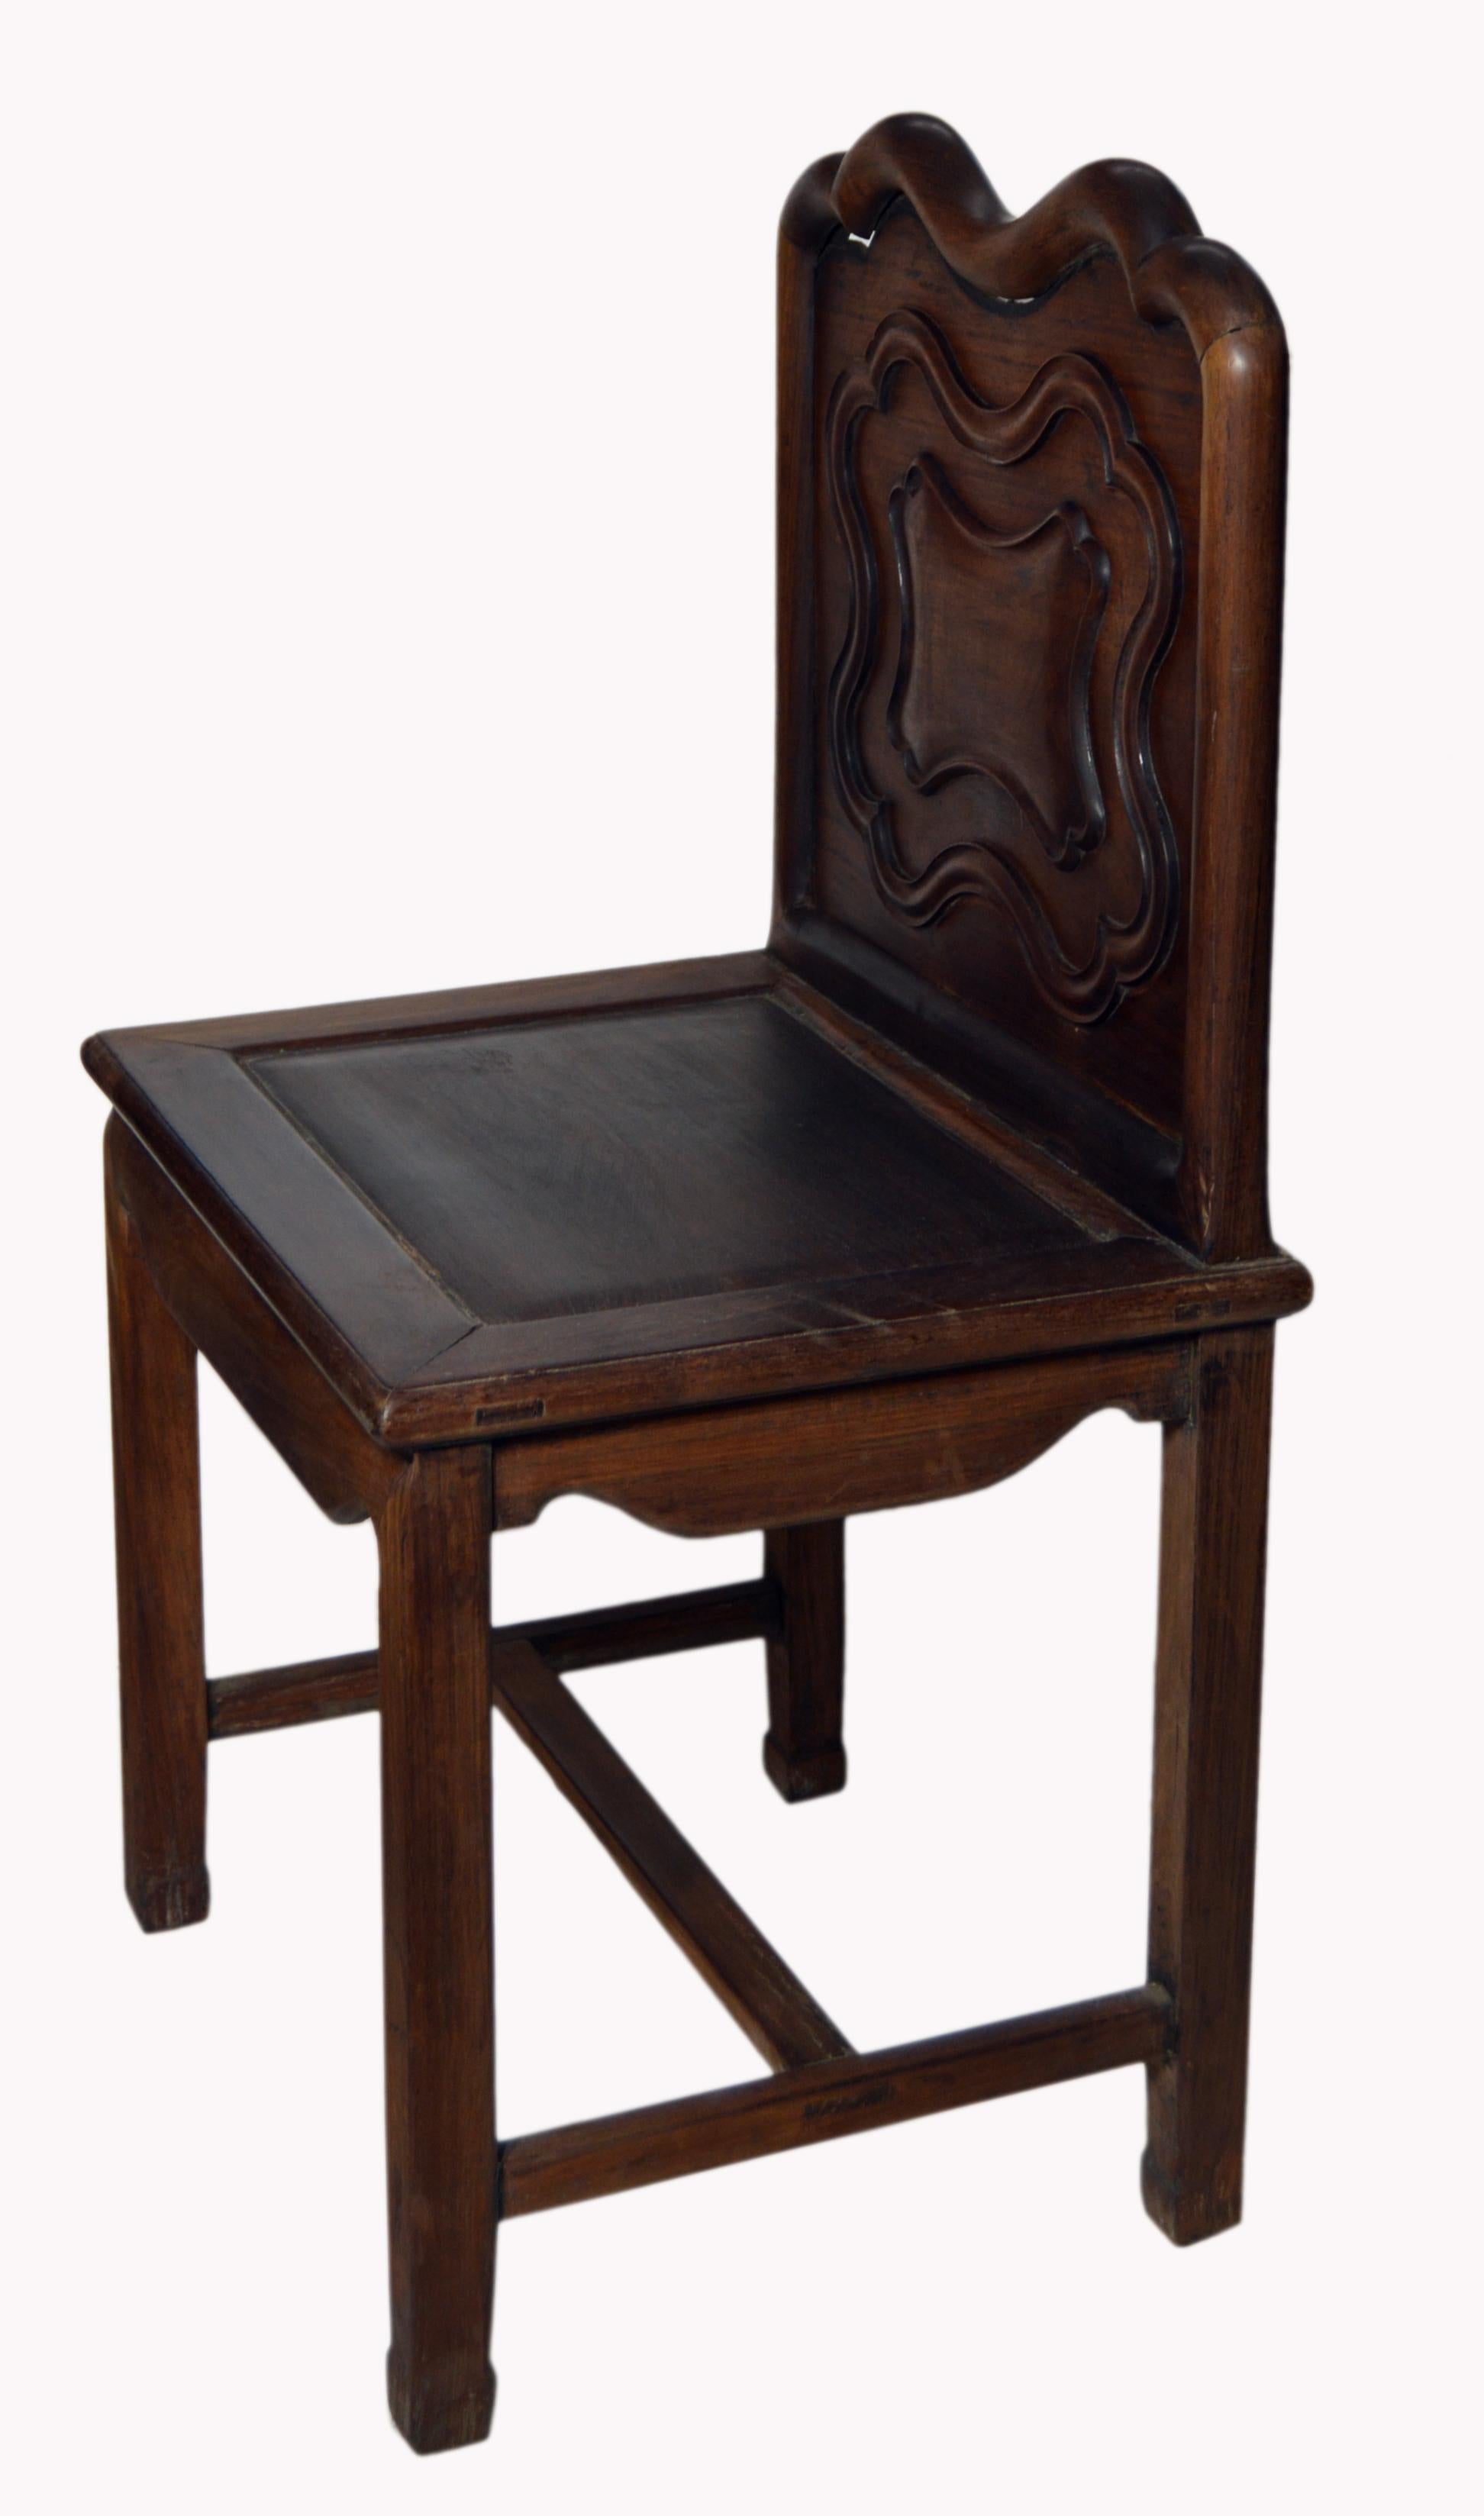 Yumu Chinese 19th Century Side Chair with Dark Lacquered Finish and Cartouche For Sale 1